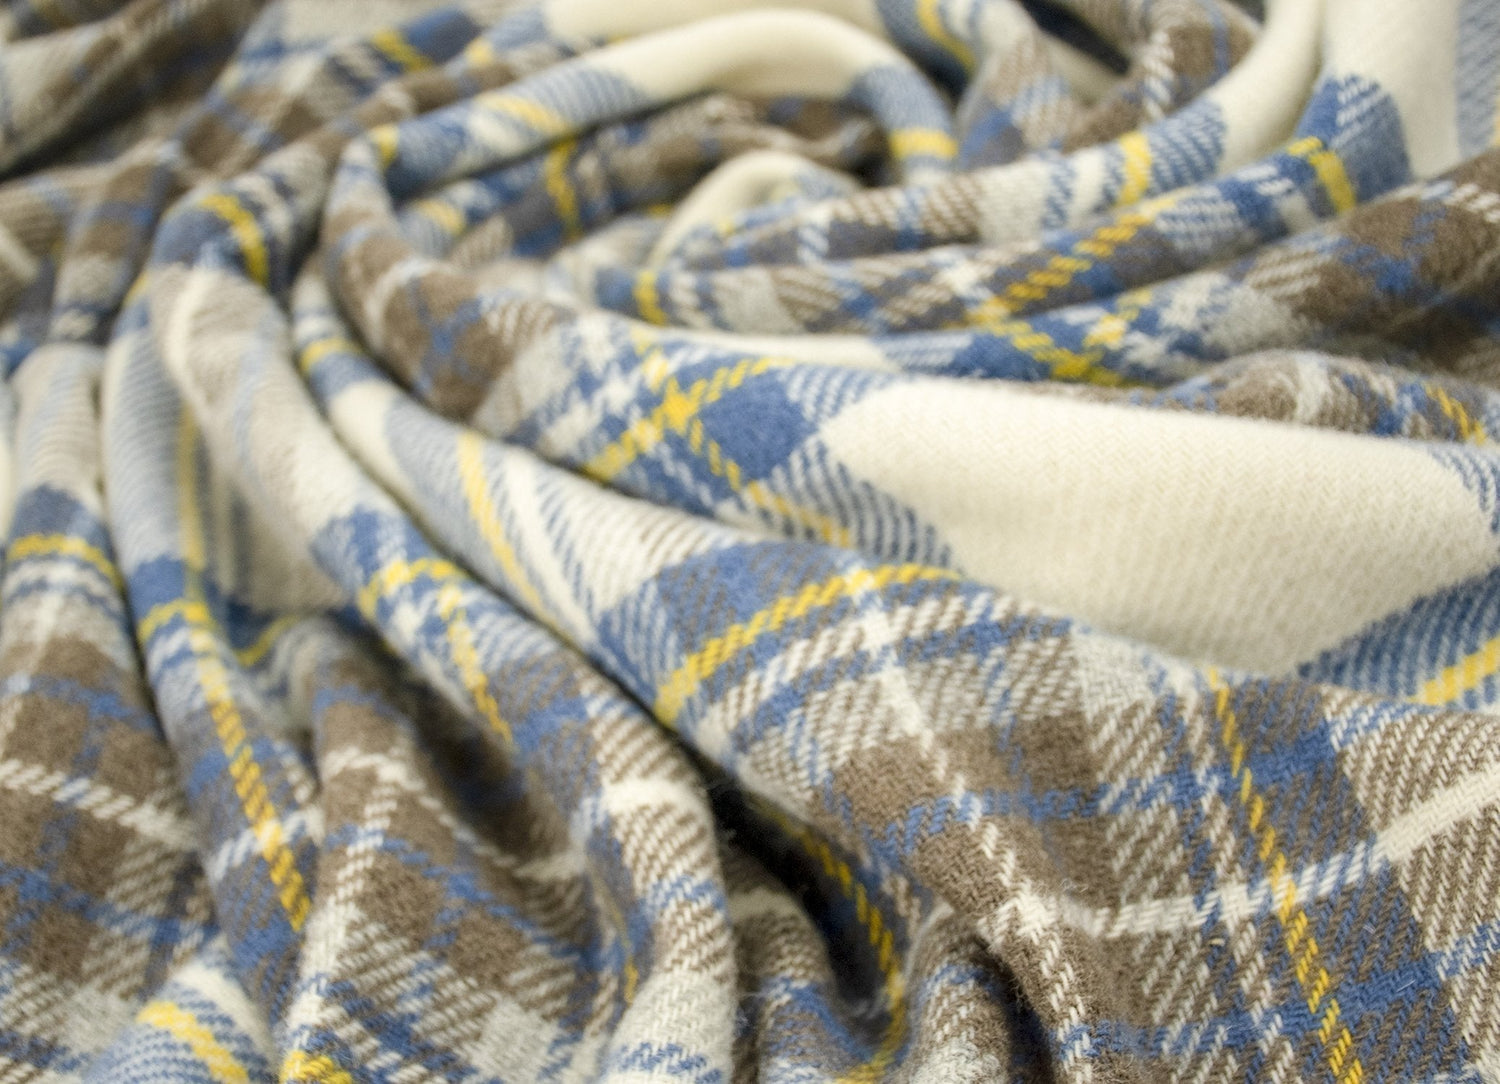 Prince of Scots Highland Tweed Pure New Wool Throw (Muted Blue Stewart)-Throws and Blankets-Prince of Scots-810032752071-J4050028-11-Prince of Scots